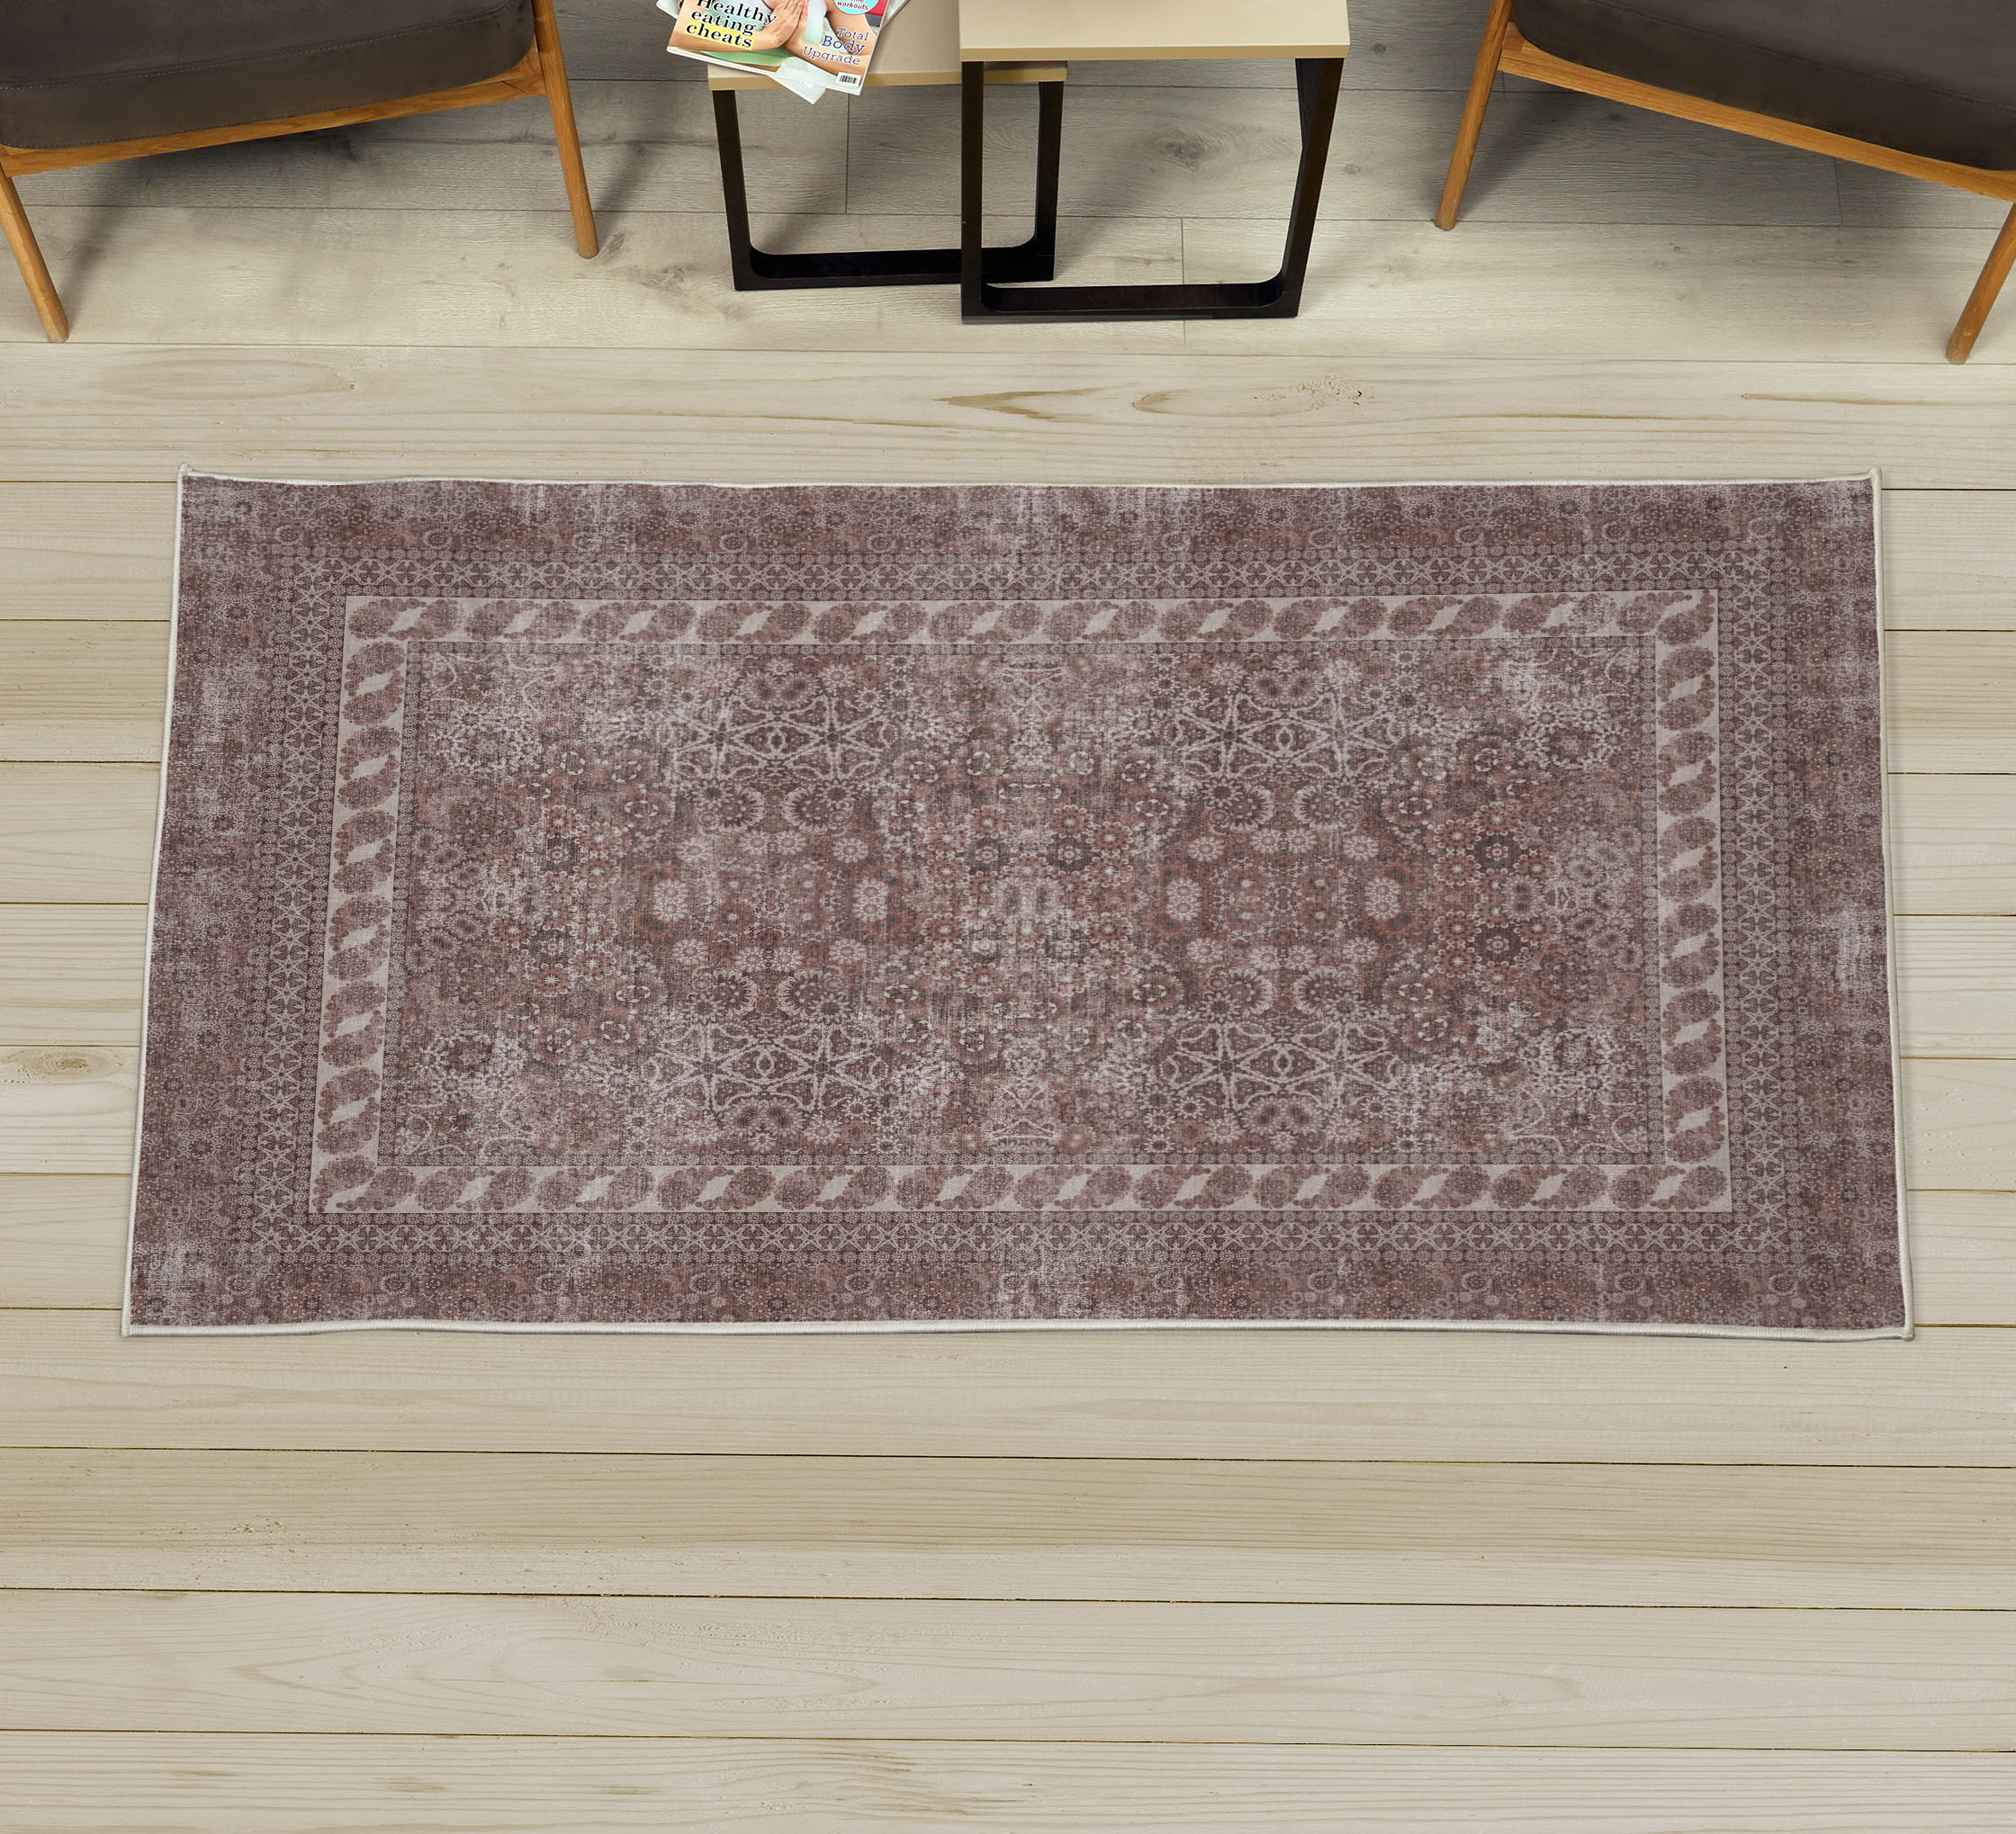 Bohemian Decorative Rug, Ethnic and Asian Design Mandala Inspired Boho Art Flower Blossoms, Quality Carpet for Bedroom Dorm and Living Room, 6 Sizes, Warm Taupe, by Ambesonne - image 1 of 1